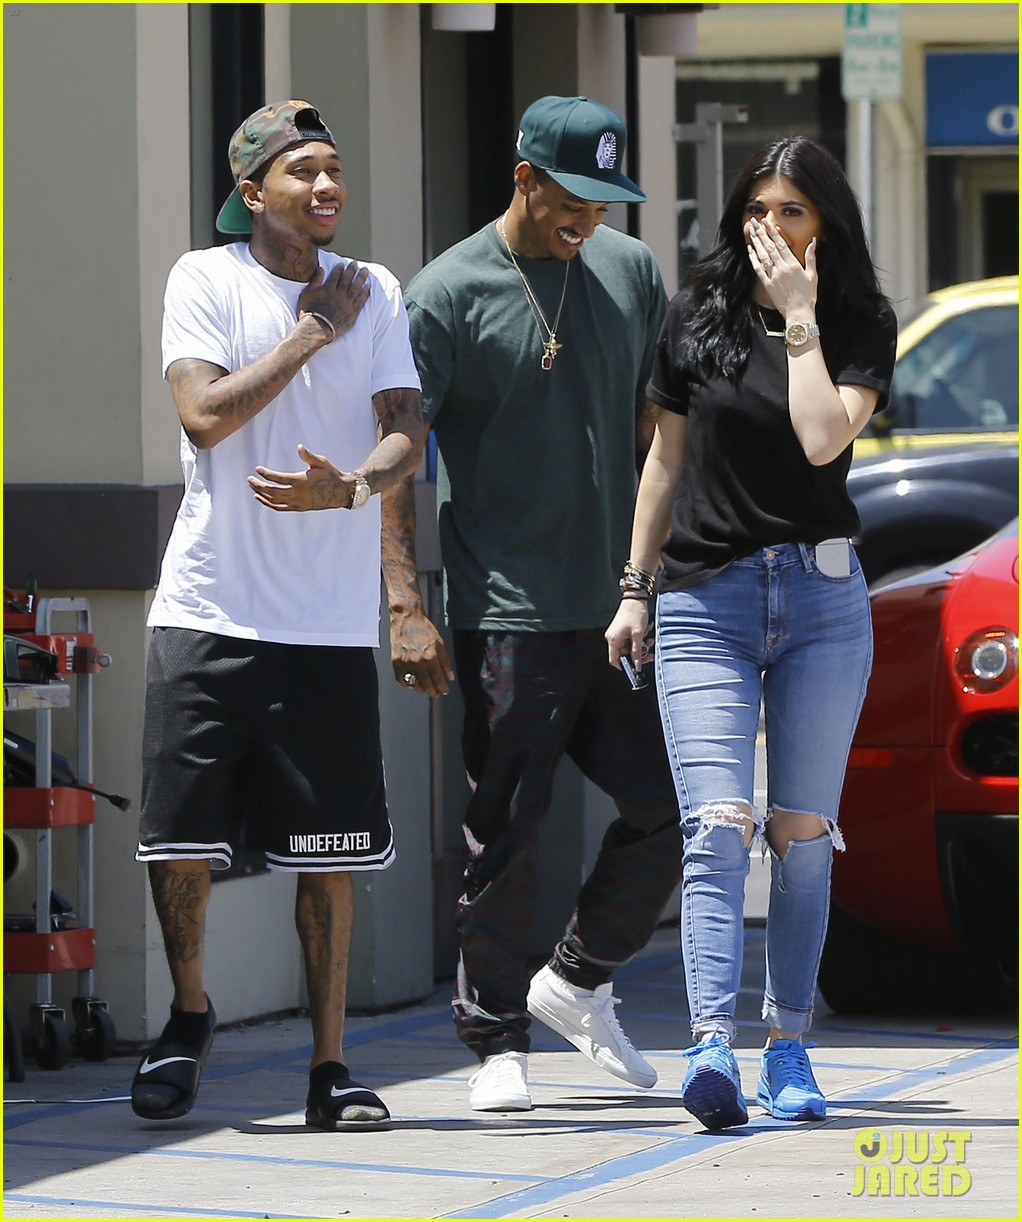 Kylie Jenner steps out with her boyfriend Tyga to visit a children's h...